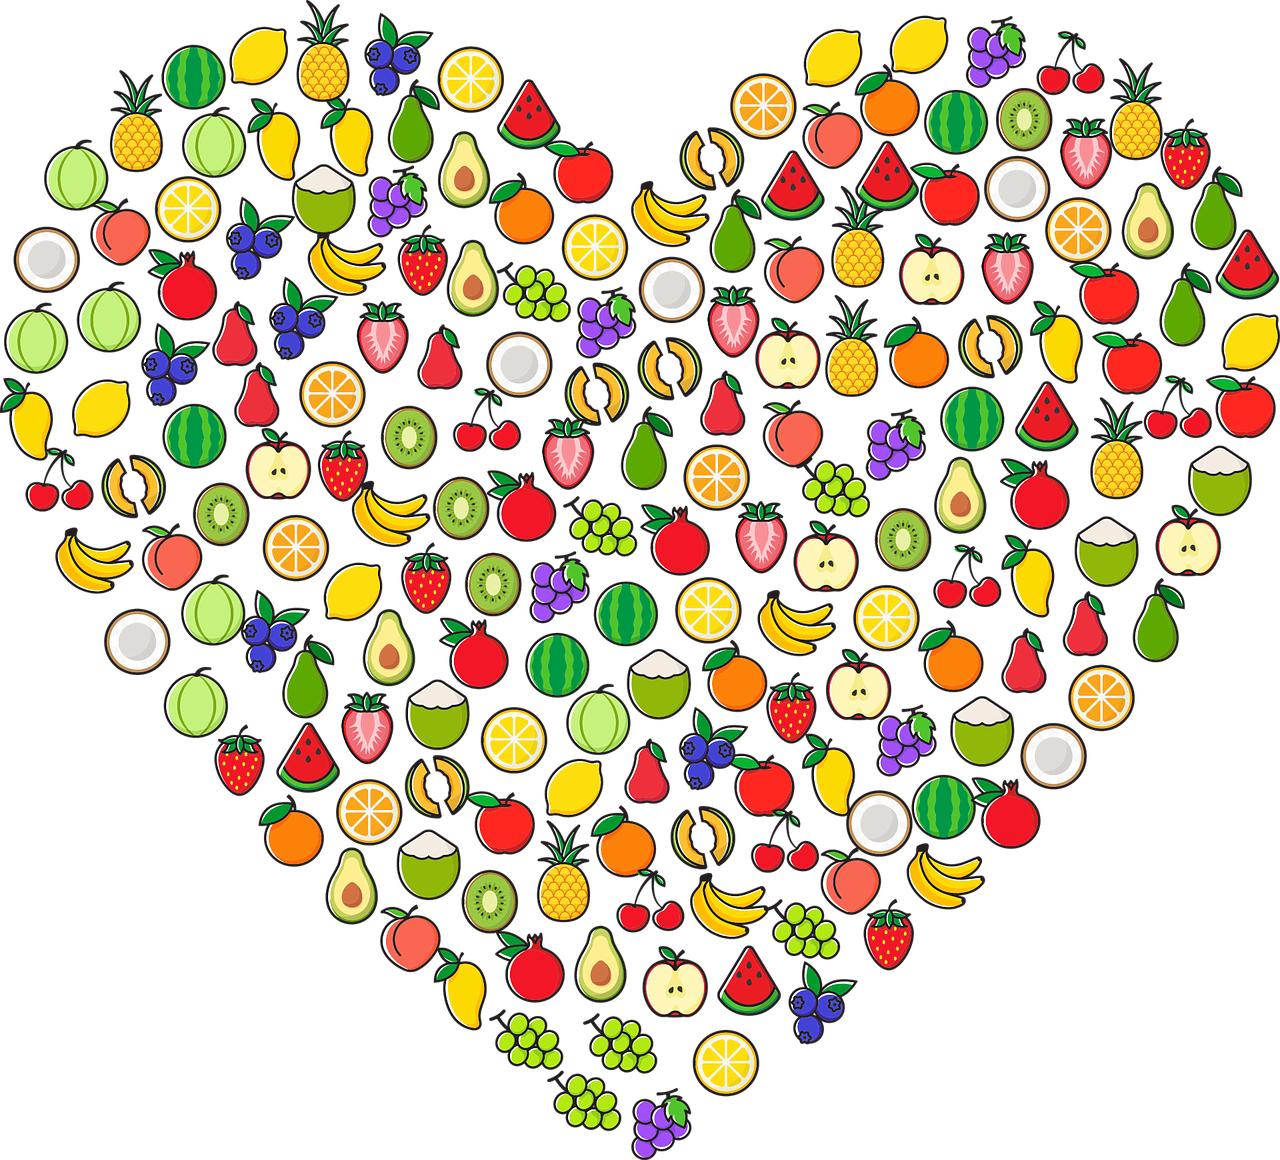 A heart made of all kinds of fruit.